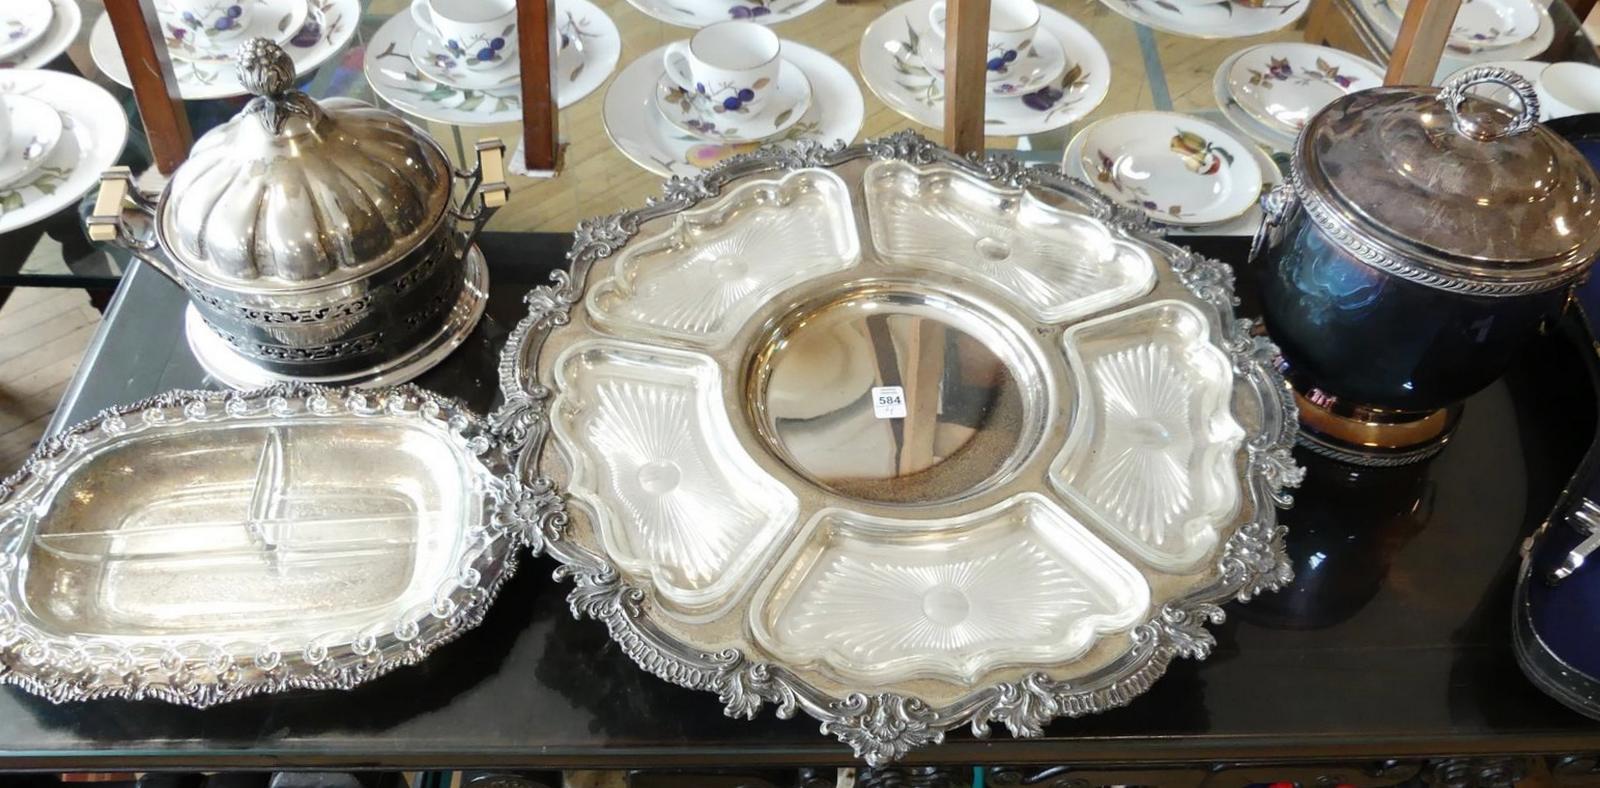 FOUR SILVERPLATE SERVING PIECES